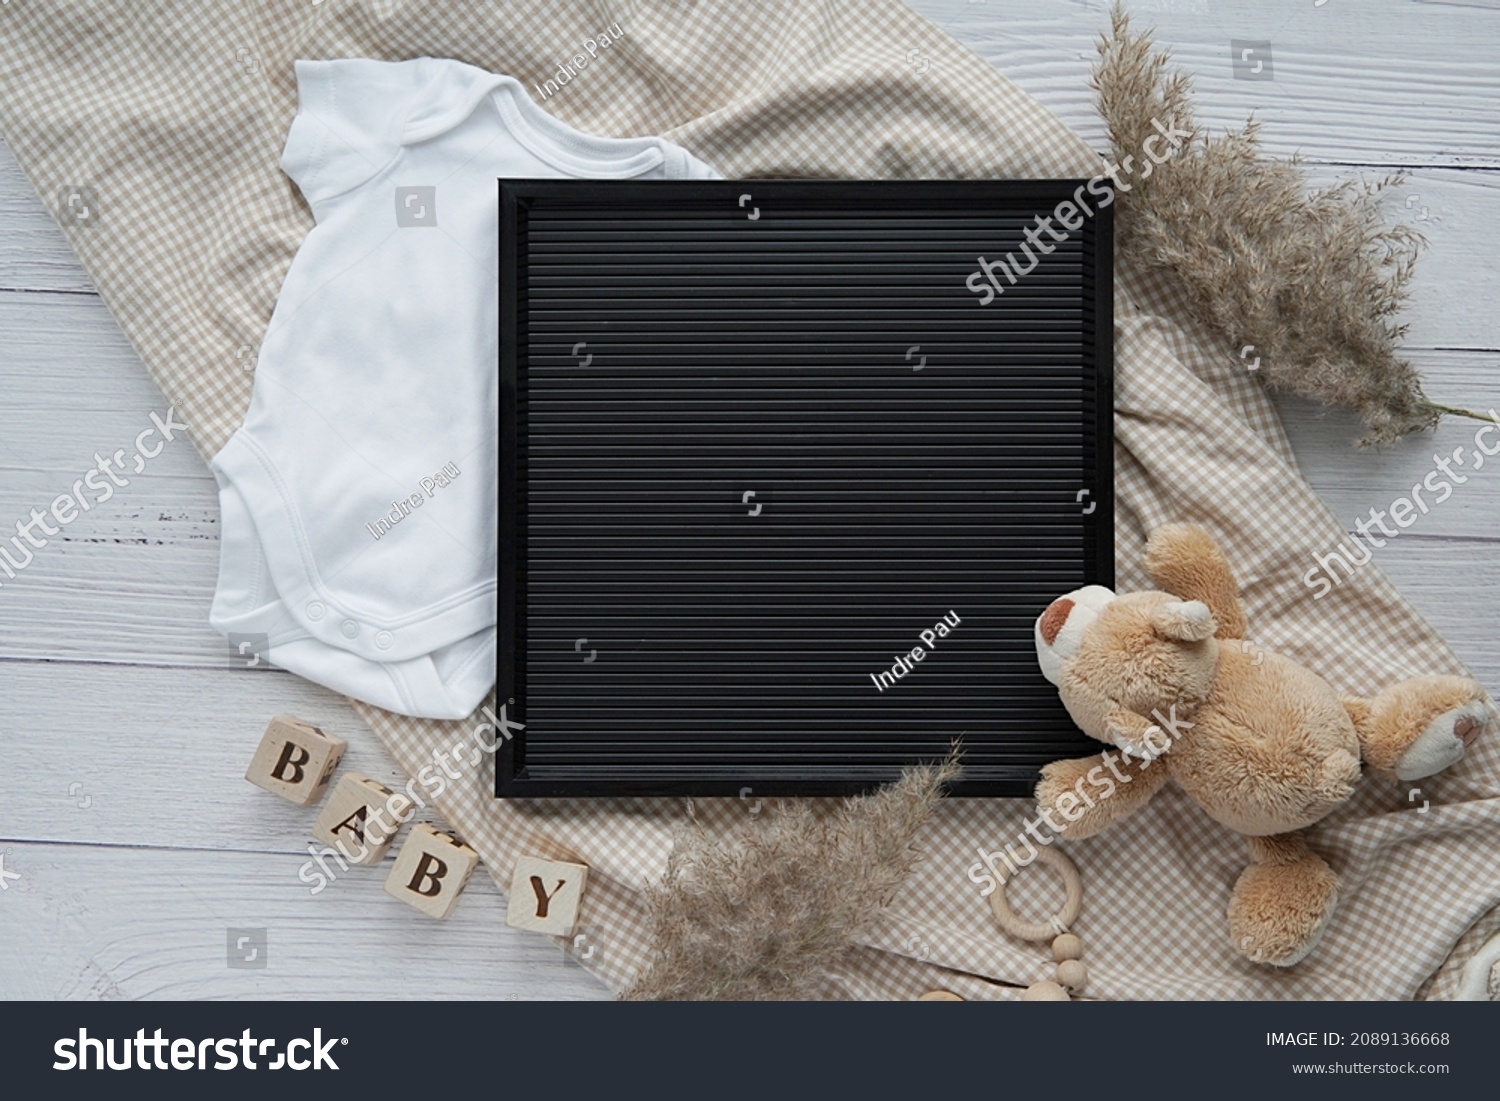 Black letterboard mockup, baby bodysuit, toys, pampas grass, blanket, pregnancy announcement, baby waiting. #2089136668